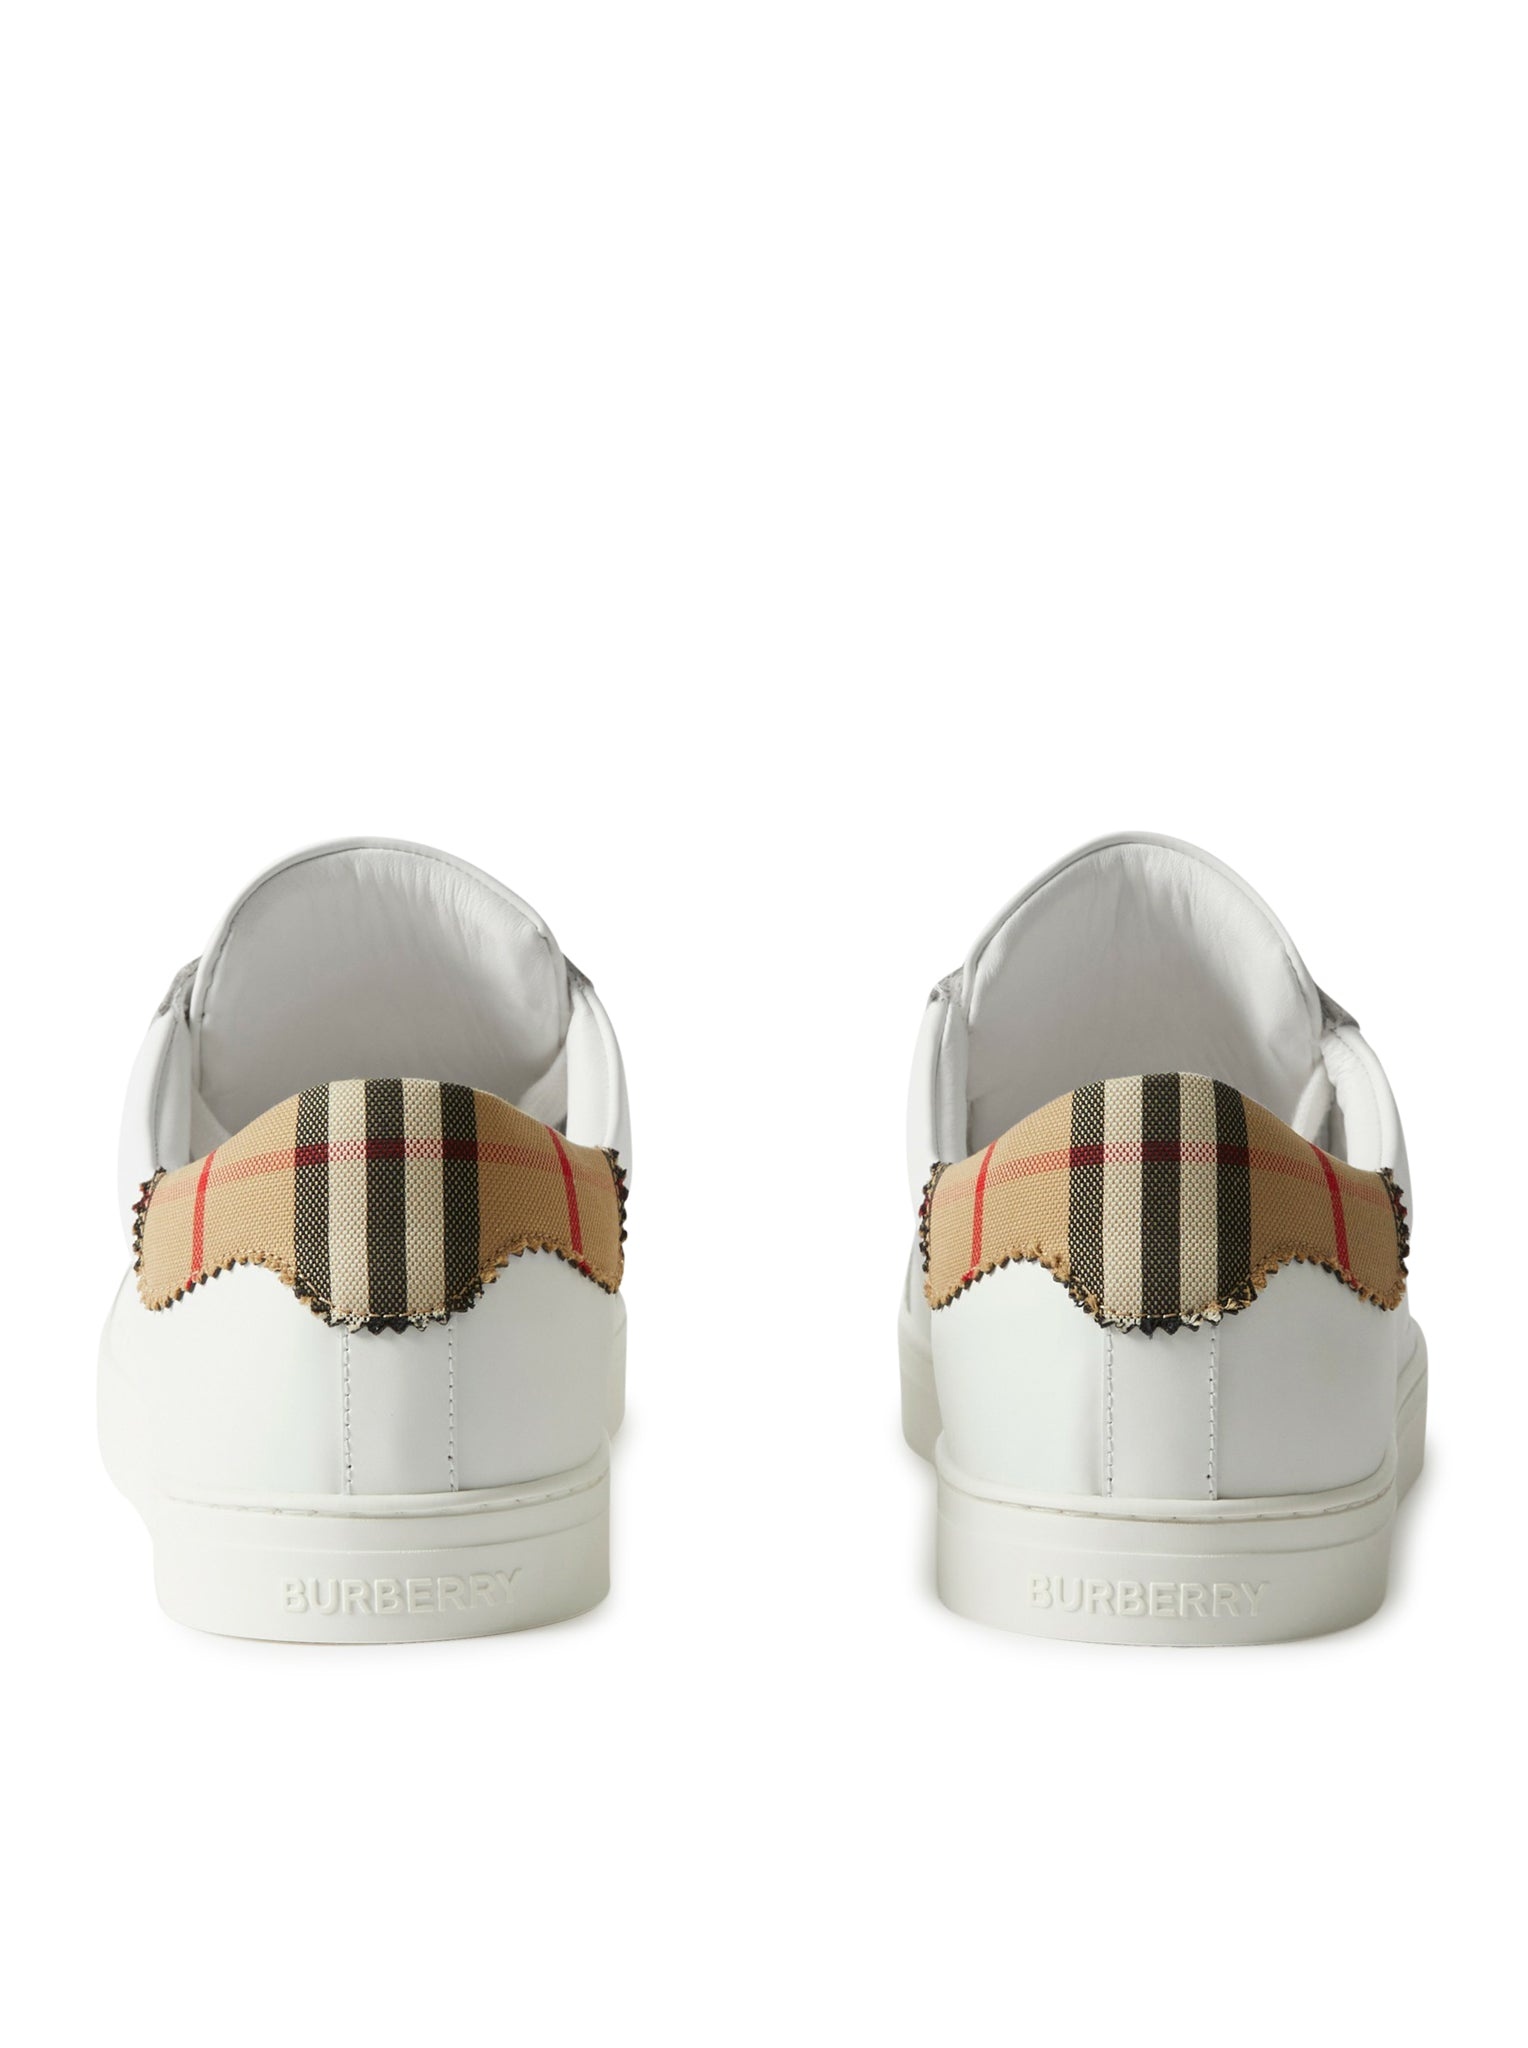 SNEAKER IN LEATHER, SUEDE AND COTTON WITH TARTAN MOTIF - 5